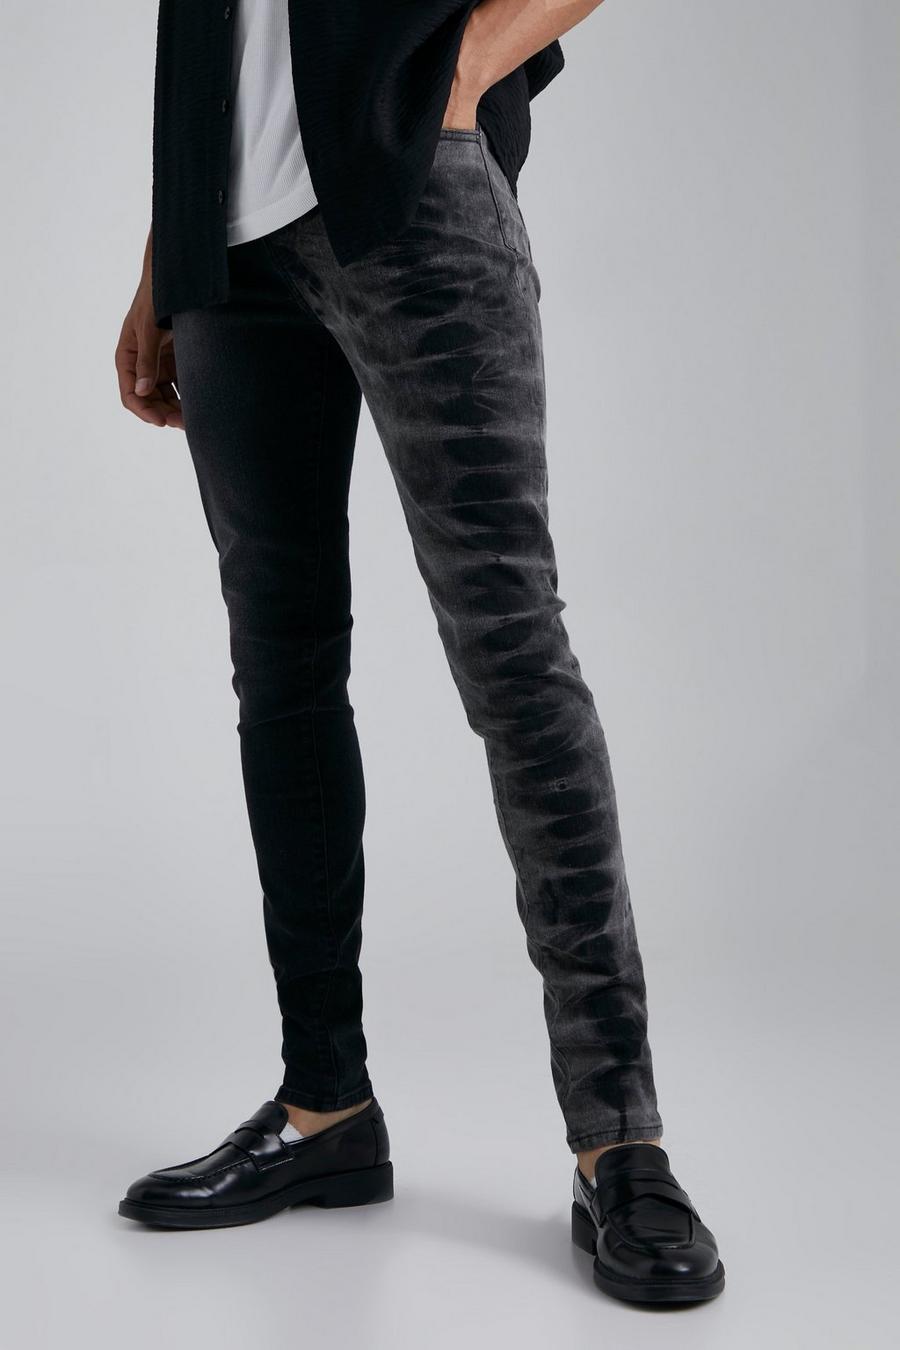 Jeans Tall Skinny Fit Stretch in fantasia tie dye a effetto patchwork, Black nero